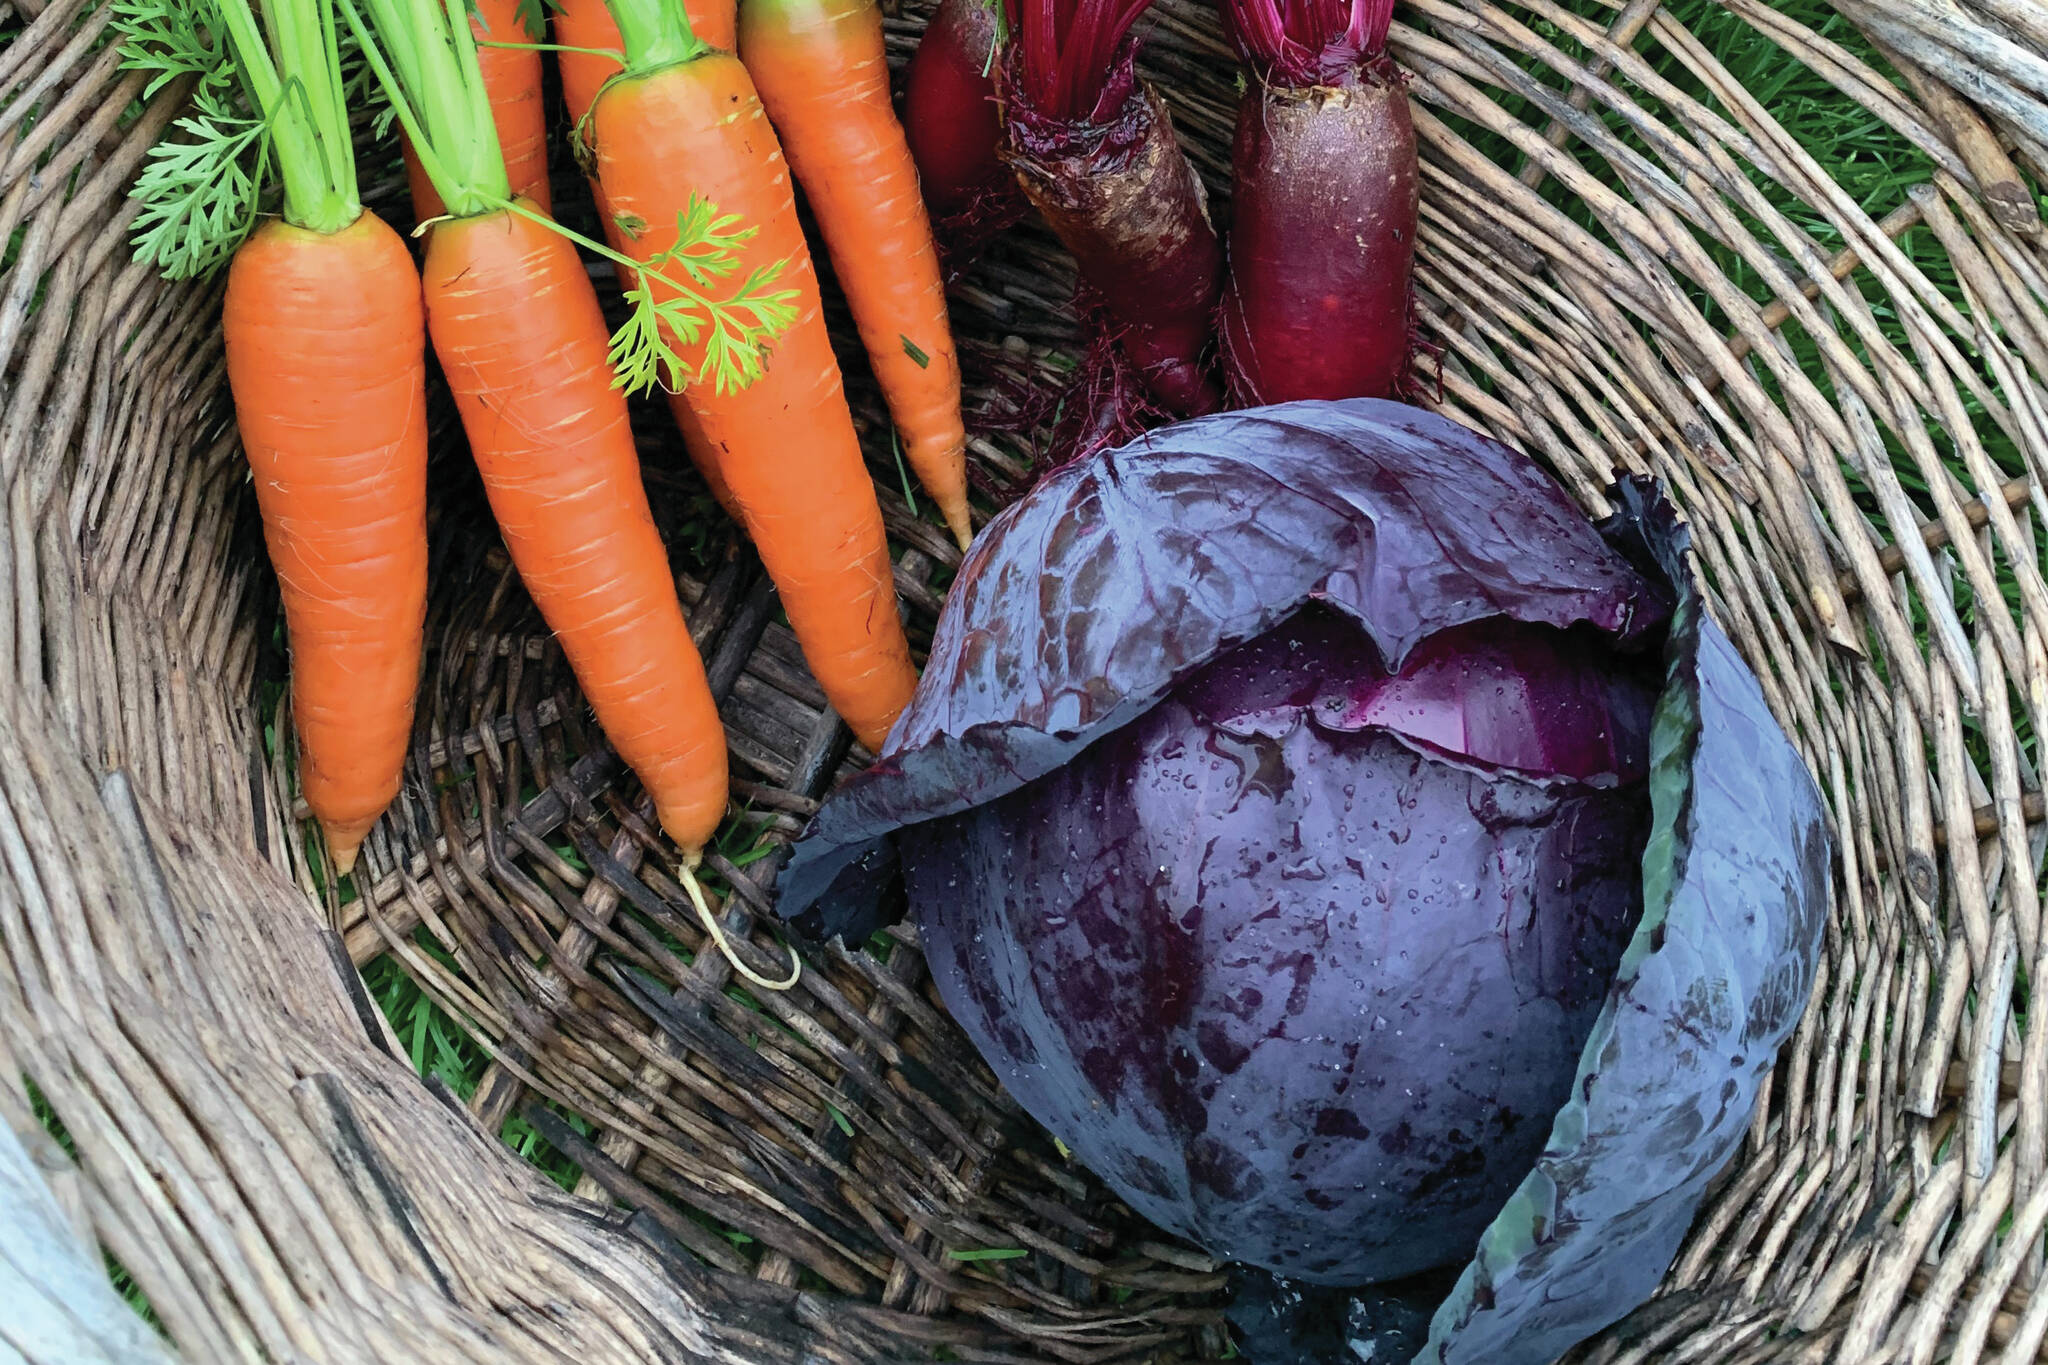 Carrots, beets, red cabbage are on their way to the kitchen. (Photo by Rosemary Fitzpatrick)